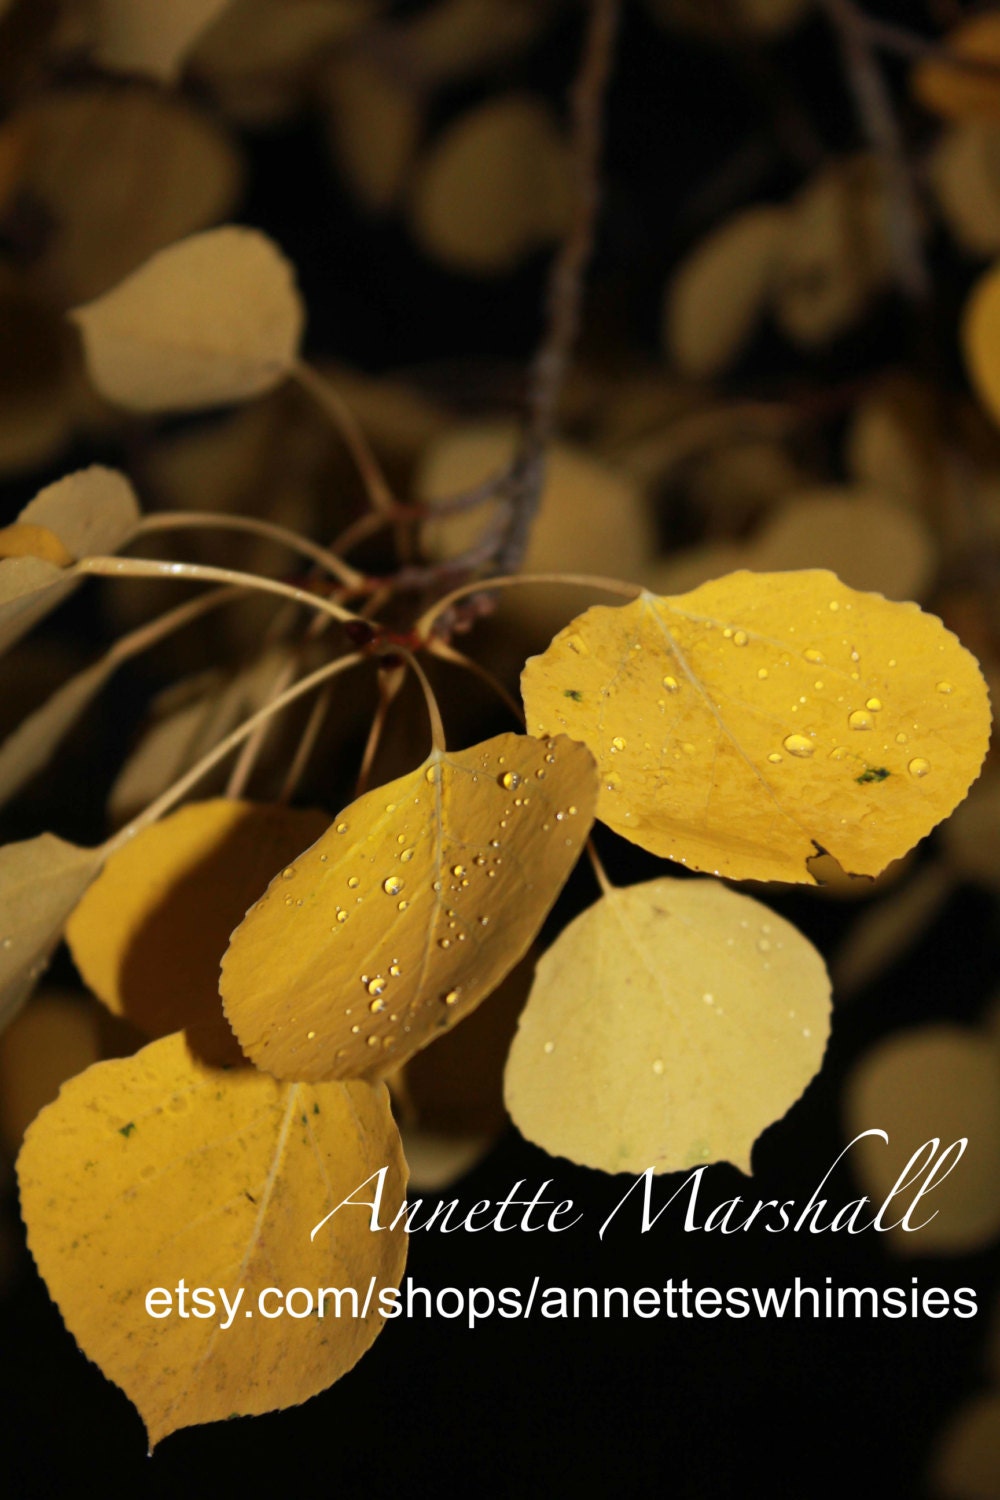 Rocky Mountain Fall foliage Aspen leaves 5x7 photograph - annetteswhimsies